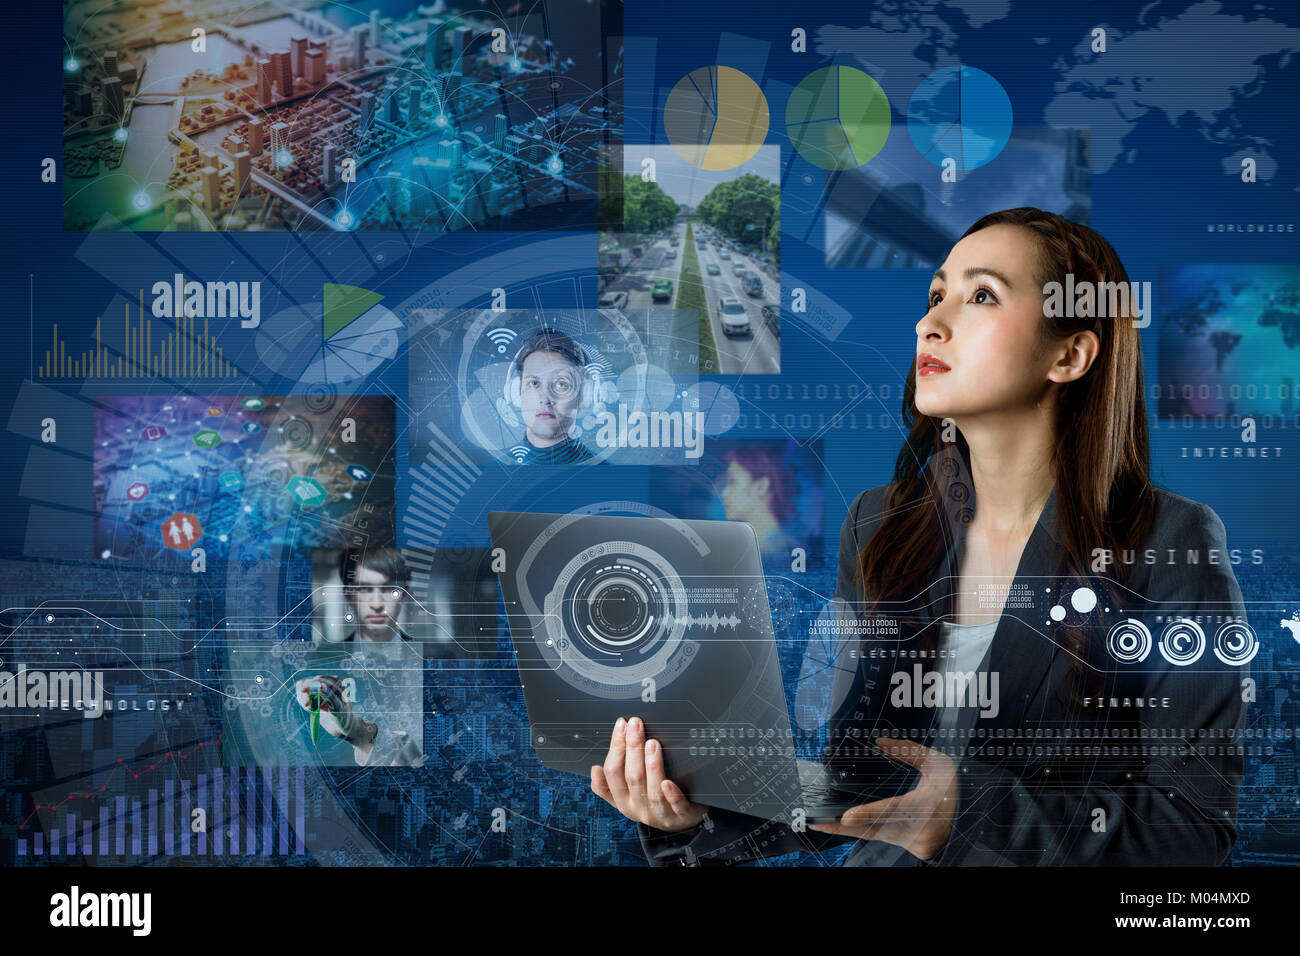 online curation media concept. electronic newspaper. young woman holding laptop PC and various news images. abstract mixed media. Stock Photo